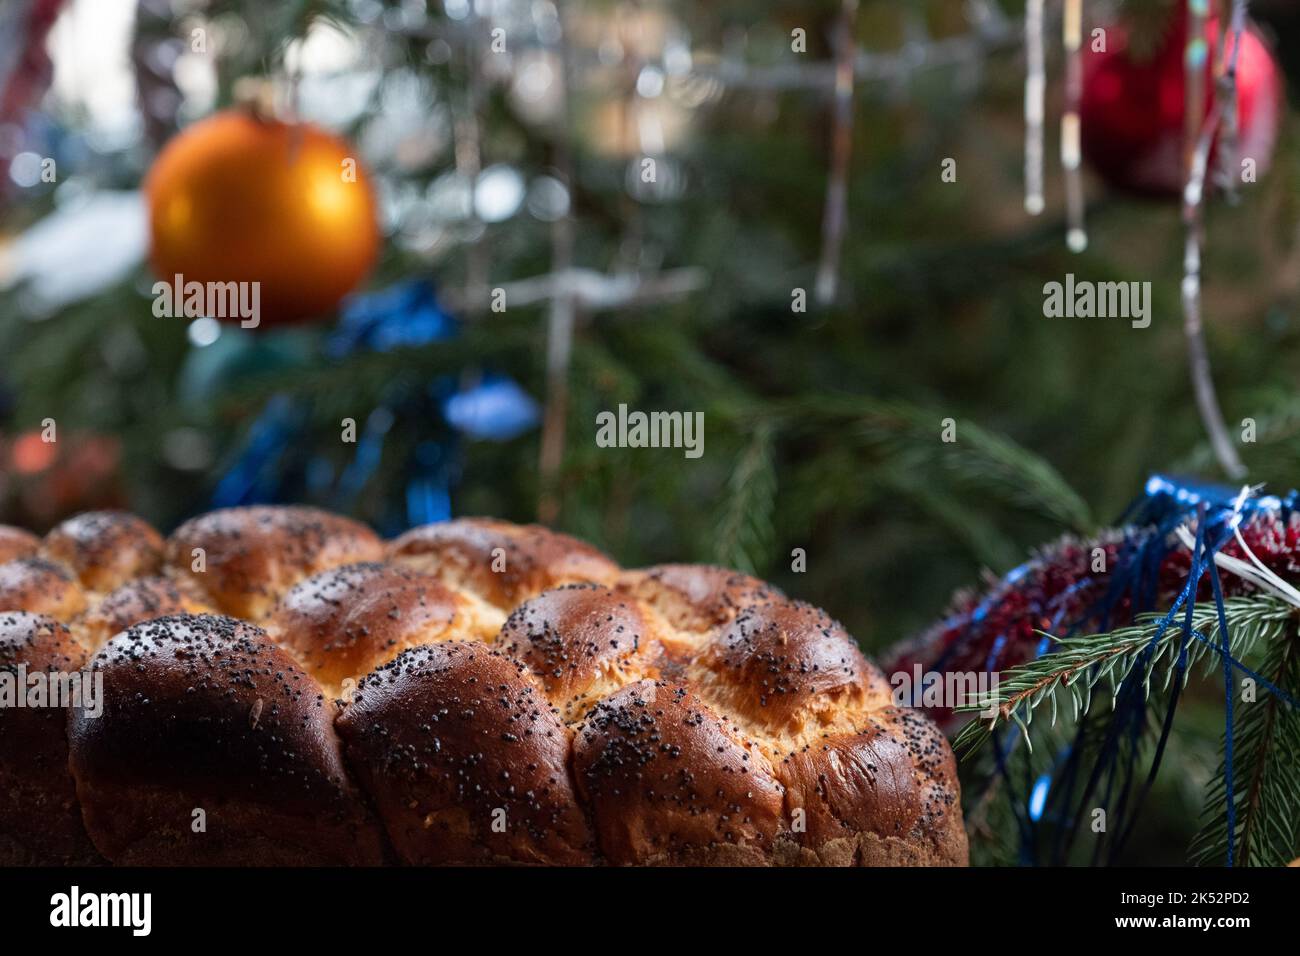 Braided bread sprinkled with poppy seeds on the textile napkin. Traditional East Slavic bread. Christmas still life. Stock Photo